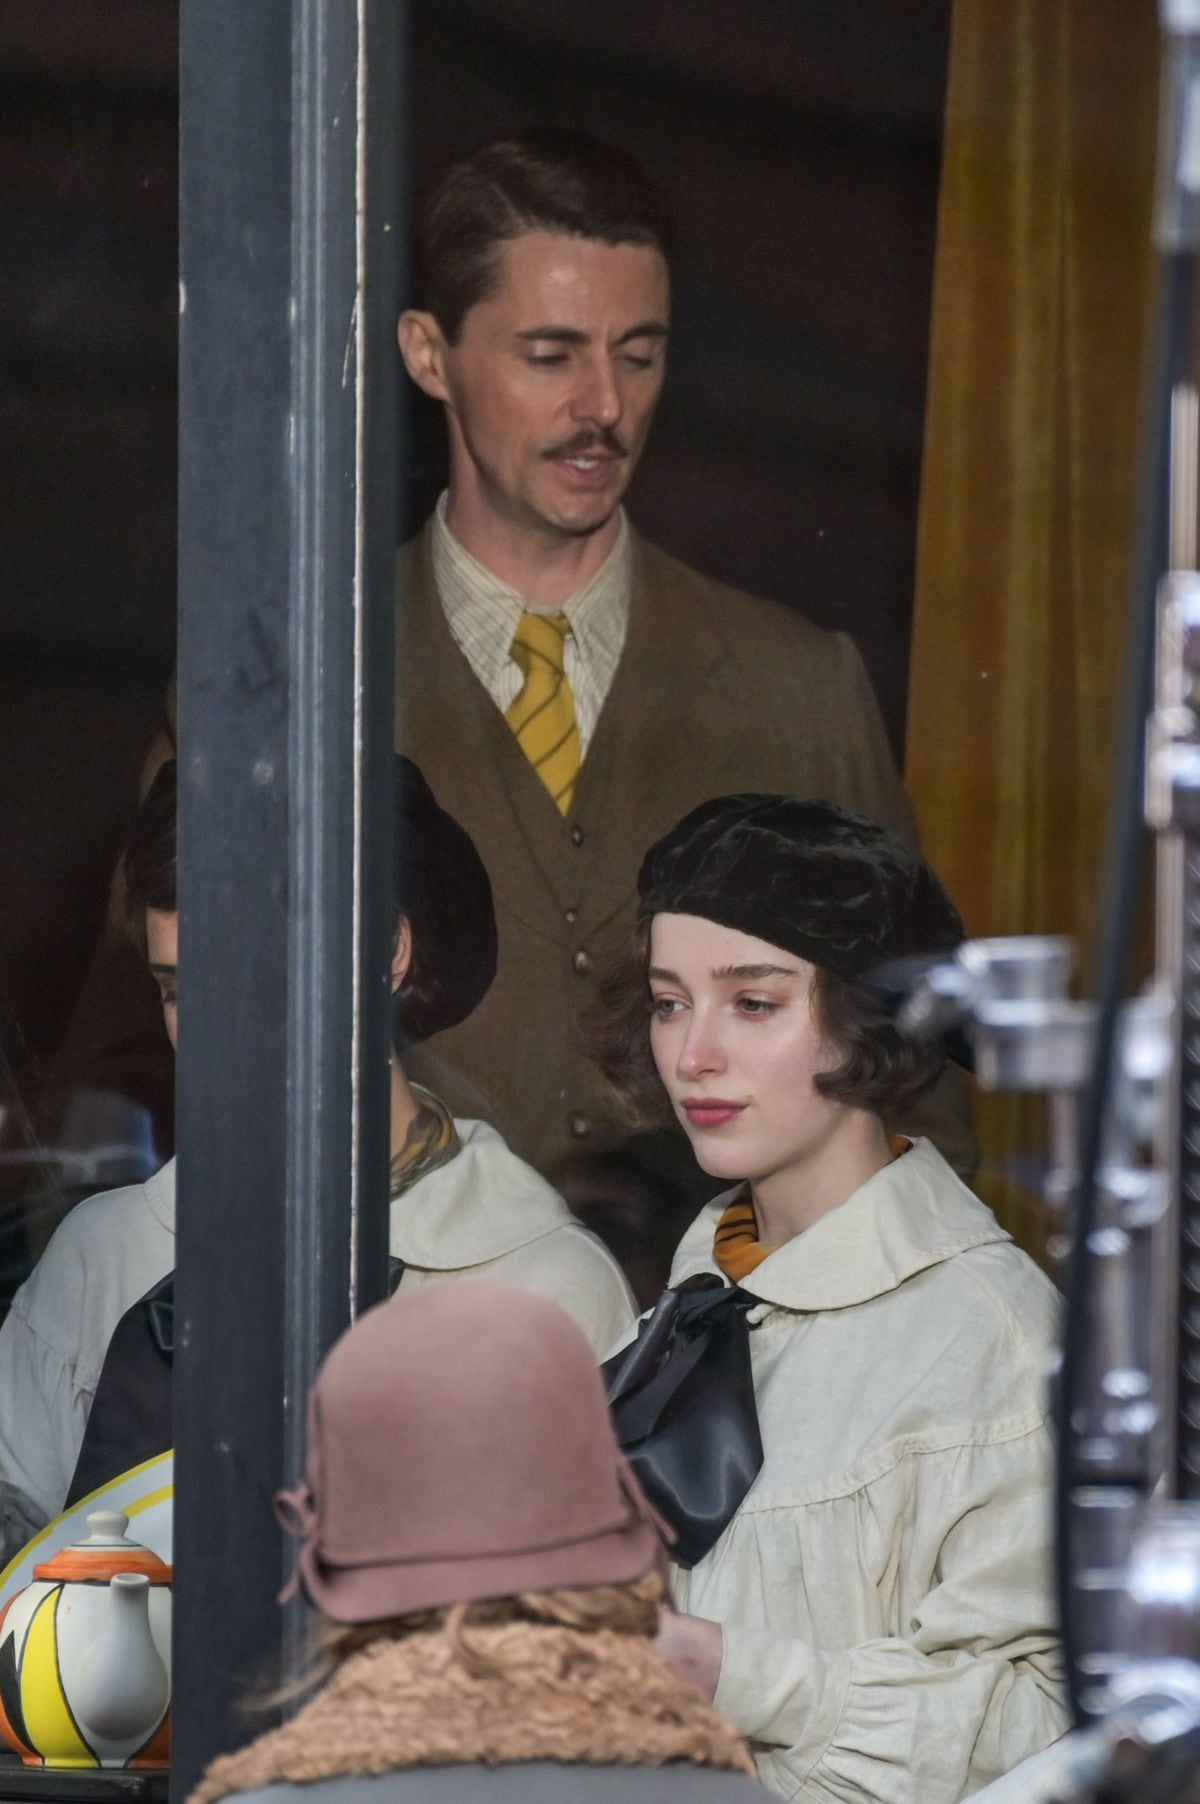 Phoebe Dynevor and Matthew Goode filming of The Colour Room in Birmingham. Photo: SnapperSK.